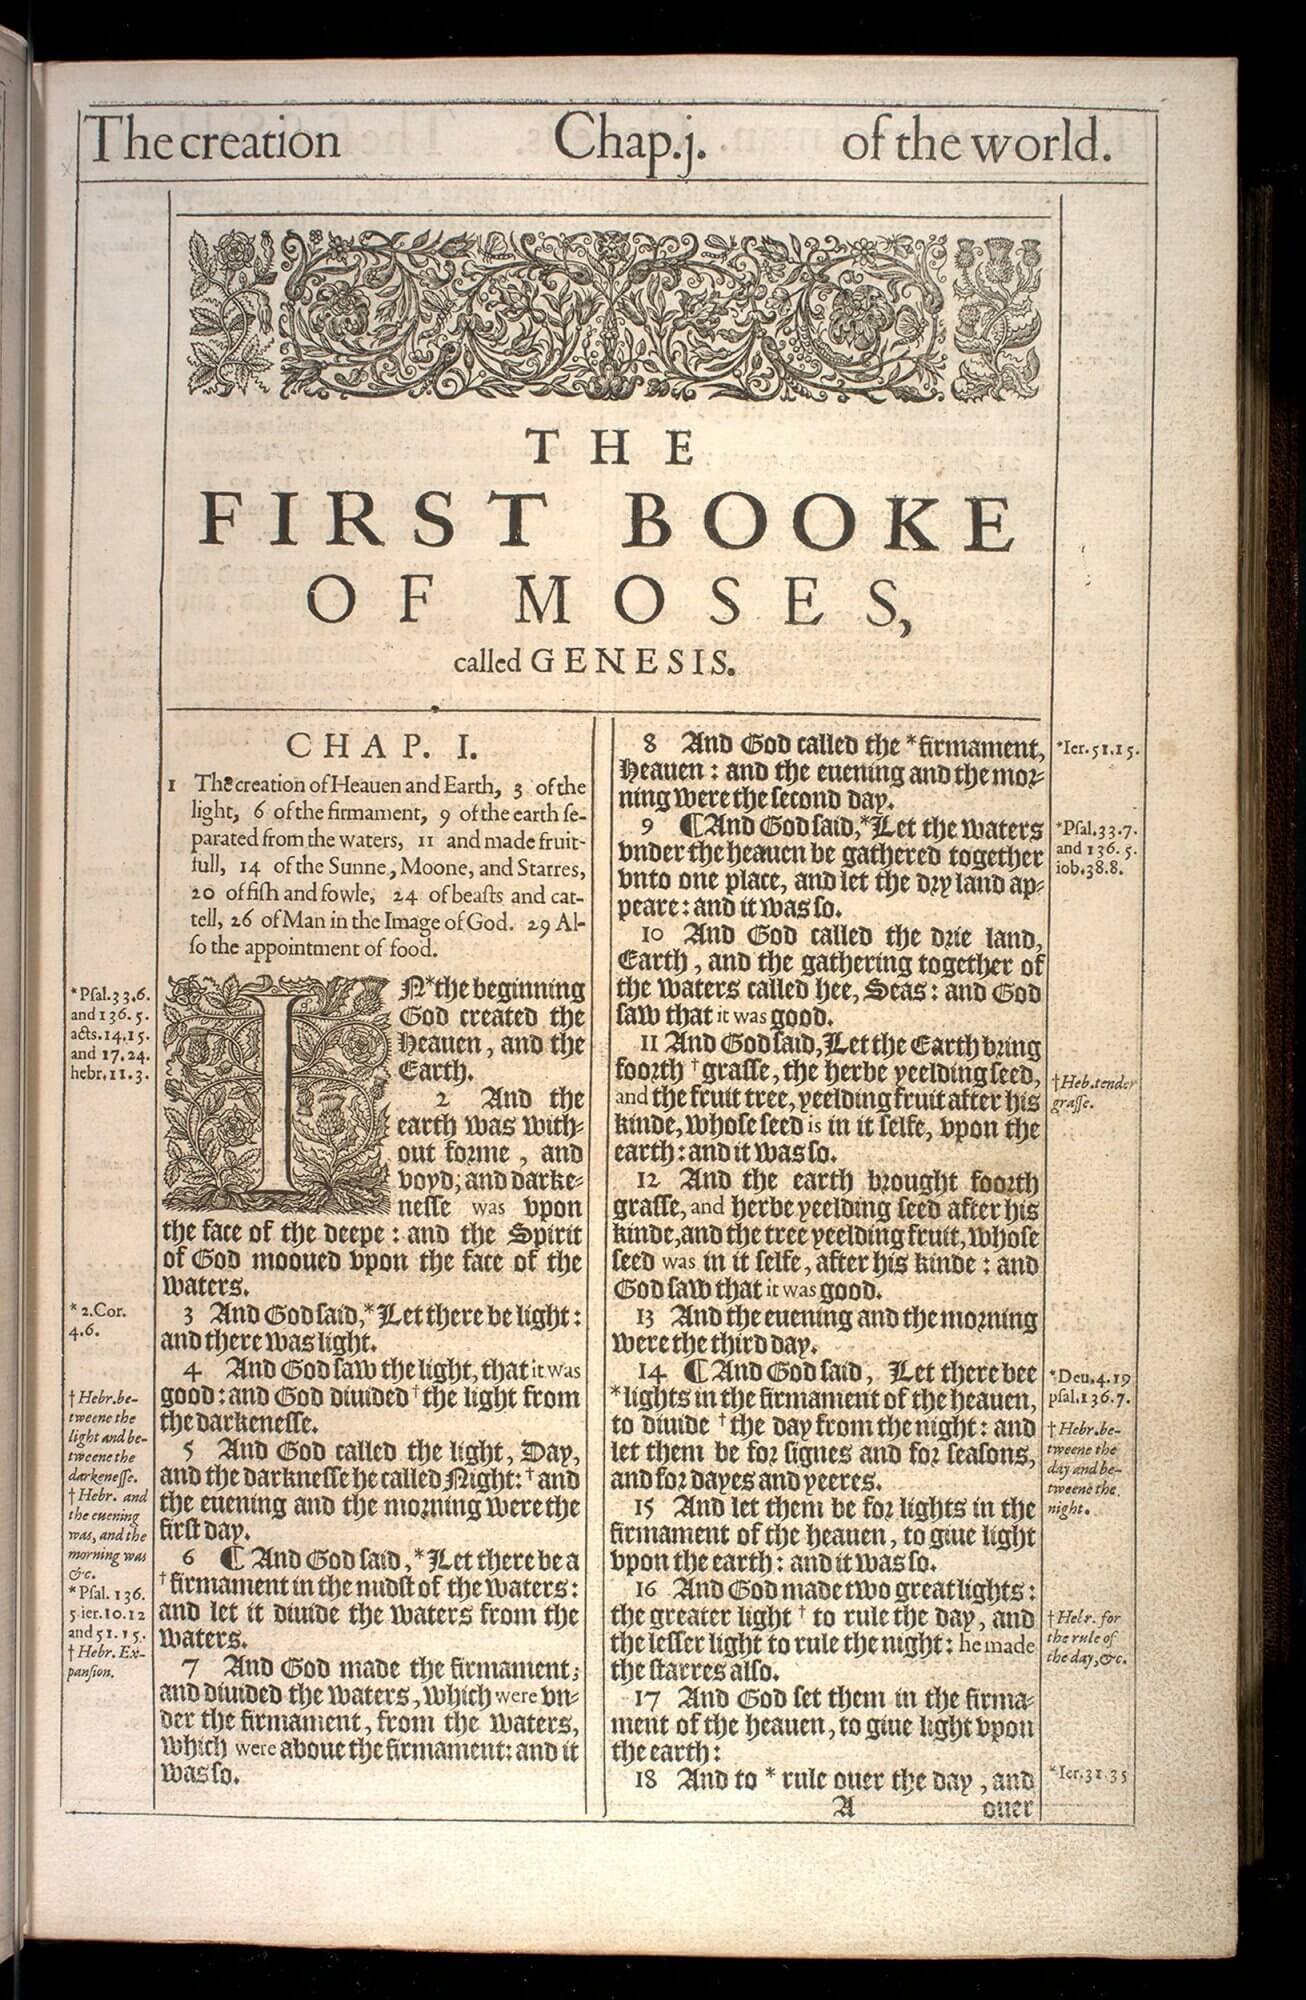 The King James Bible uses a complex typography to signal which words or phrases are not from the source material but have been added in translation (those in roman type), printed notes in roman type for cross referencing between different books, printed notes in italic for translation notes, and headnotes for each chapter providing summaries to help with quick navigation.